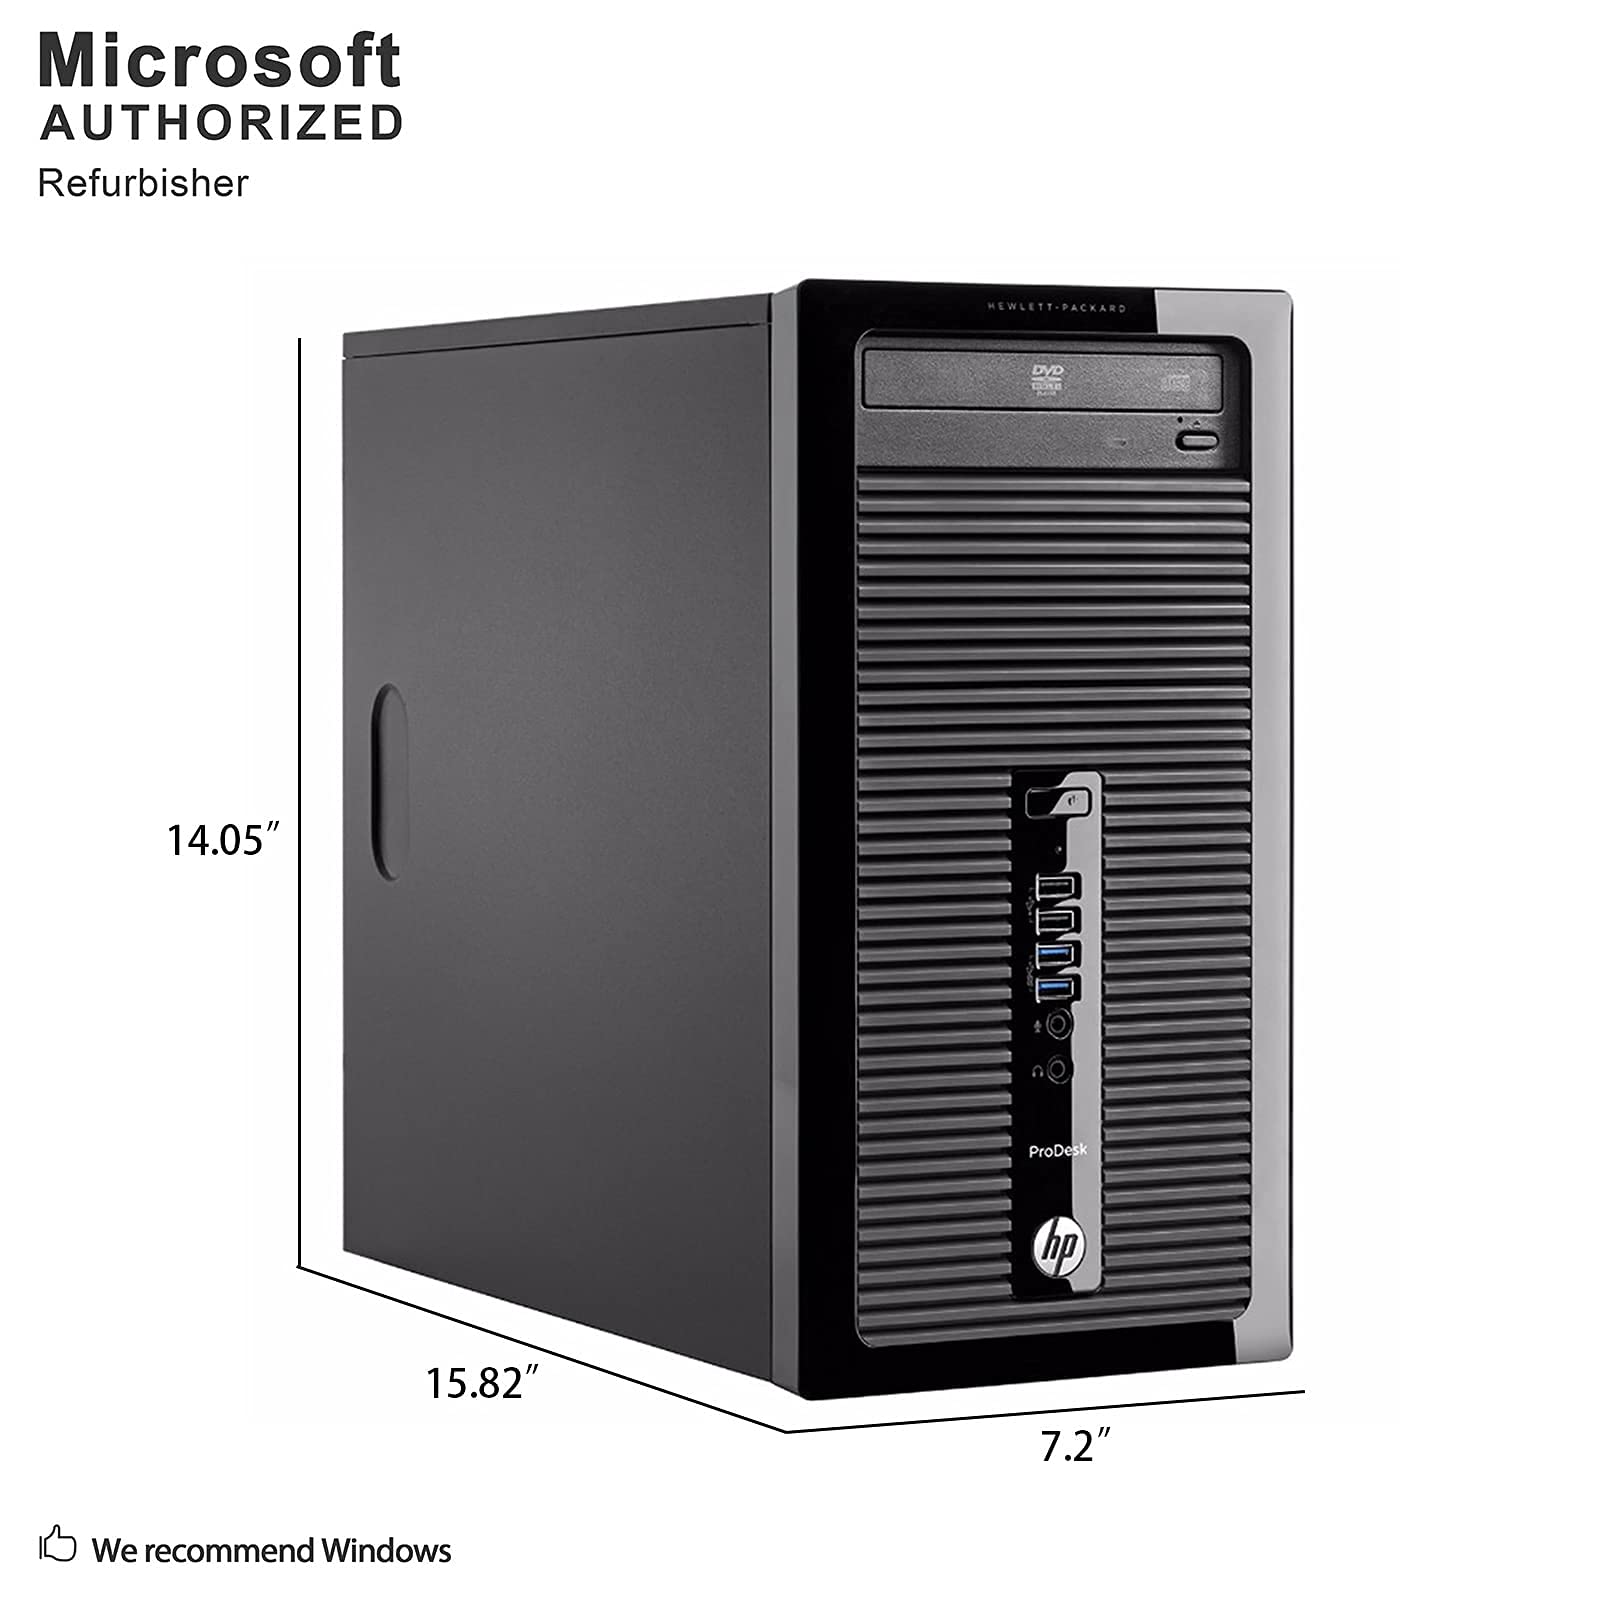 HP ProDesk 400 G1 Tower Computer PC, Intel Quad Core i5-4570 up to 3.6GHz, 16G DDR3, 256G SSD, DVD, Windows 10 Pro 64 Bit-Multi-Language Supports English/Spanish/French (Renewed)